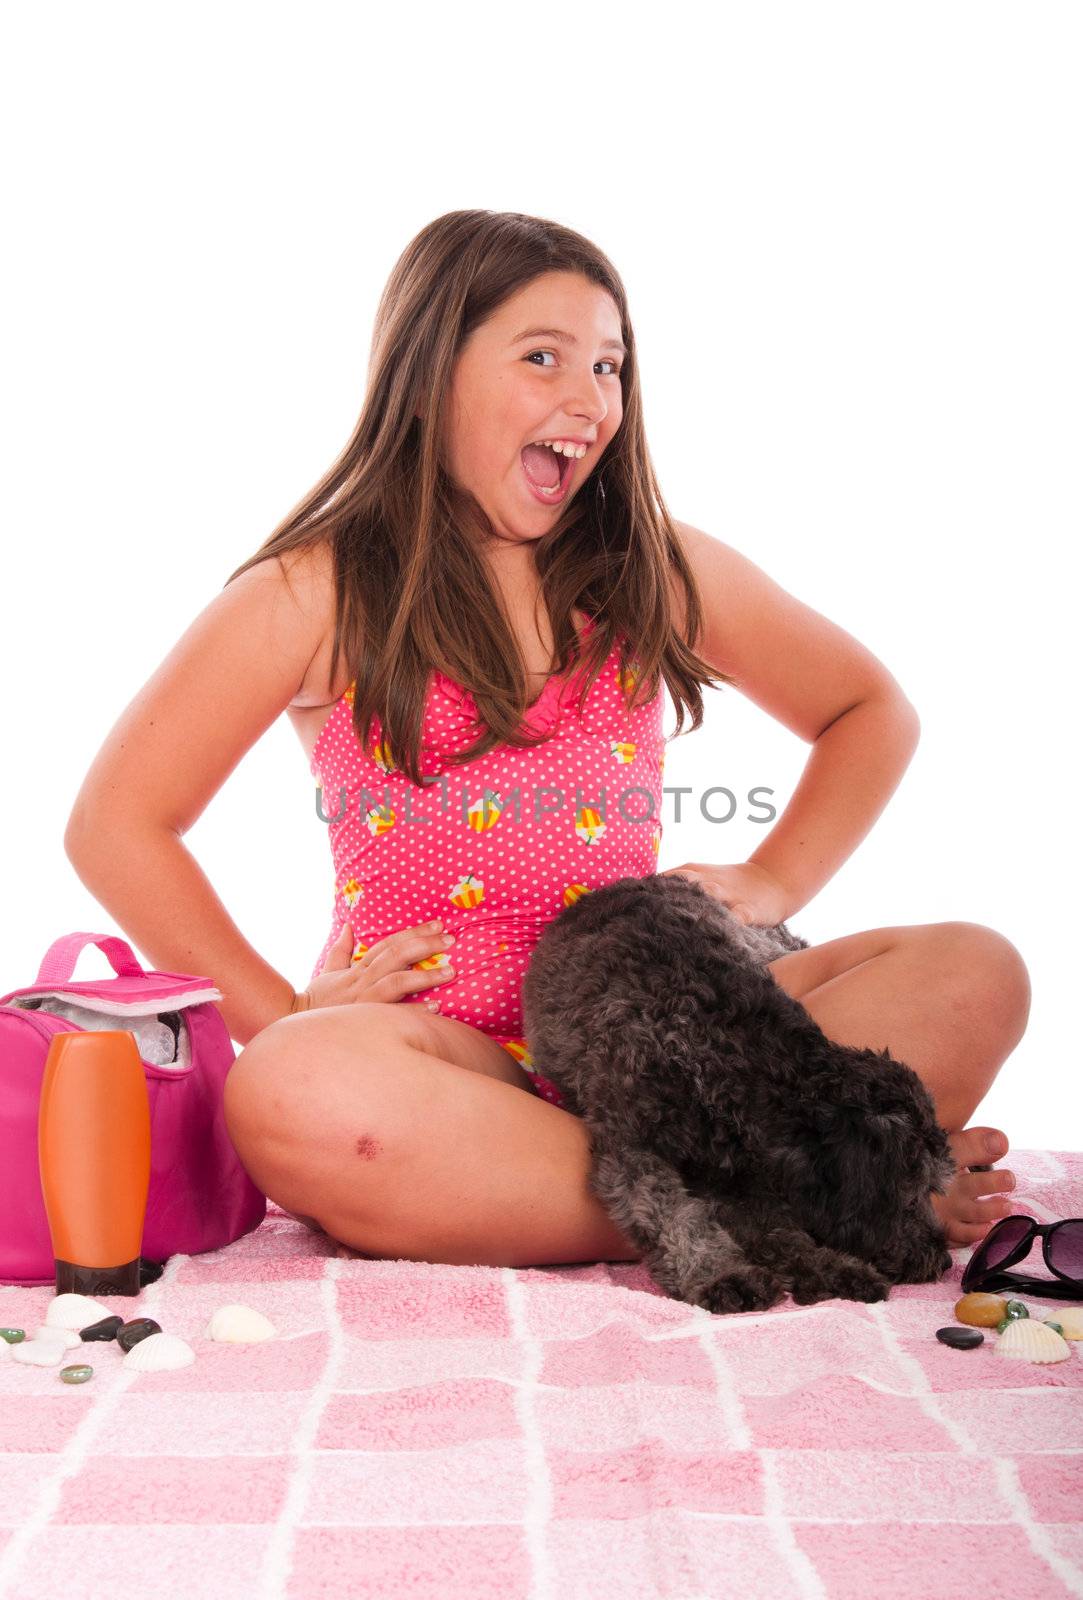 smiling brunette teenage girl in swimsuit at the beach with her shipoo dog (studio setting with beach and personal items) isolated on white background